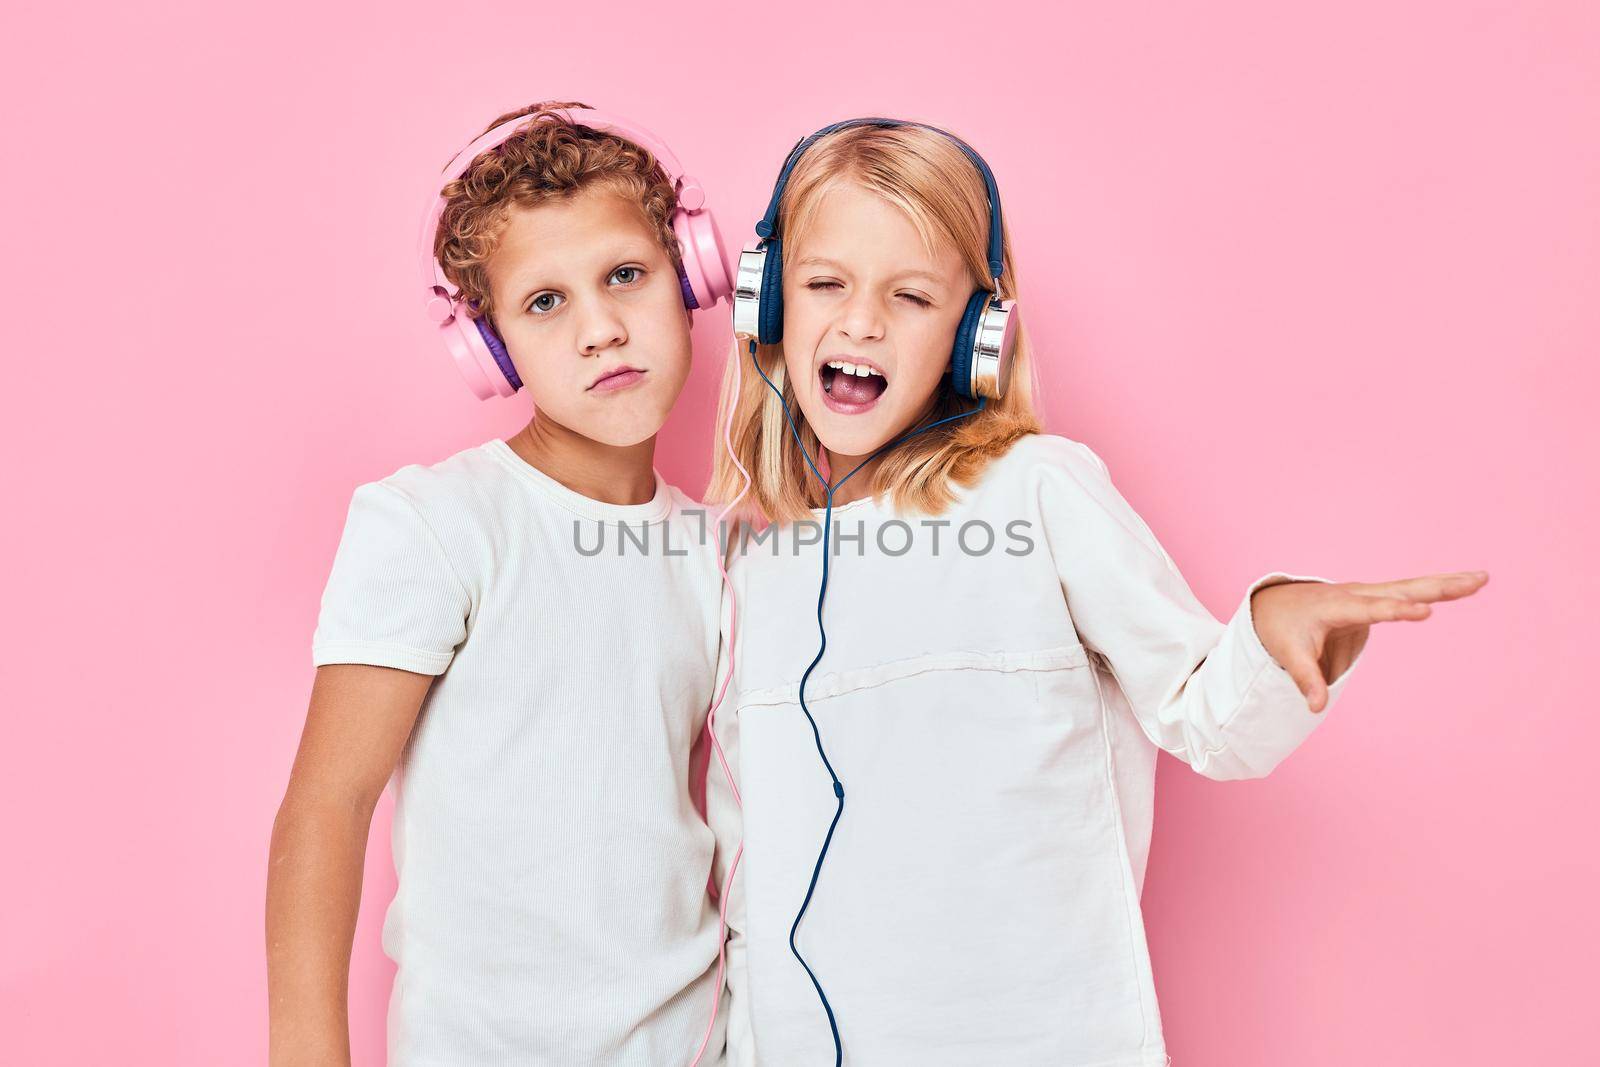 boy and girl dancing with headphones entertainment lifestyle childhood. High quality photo